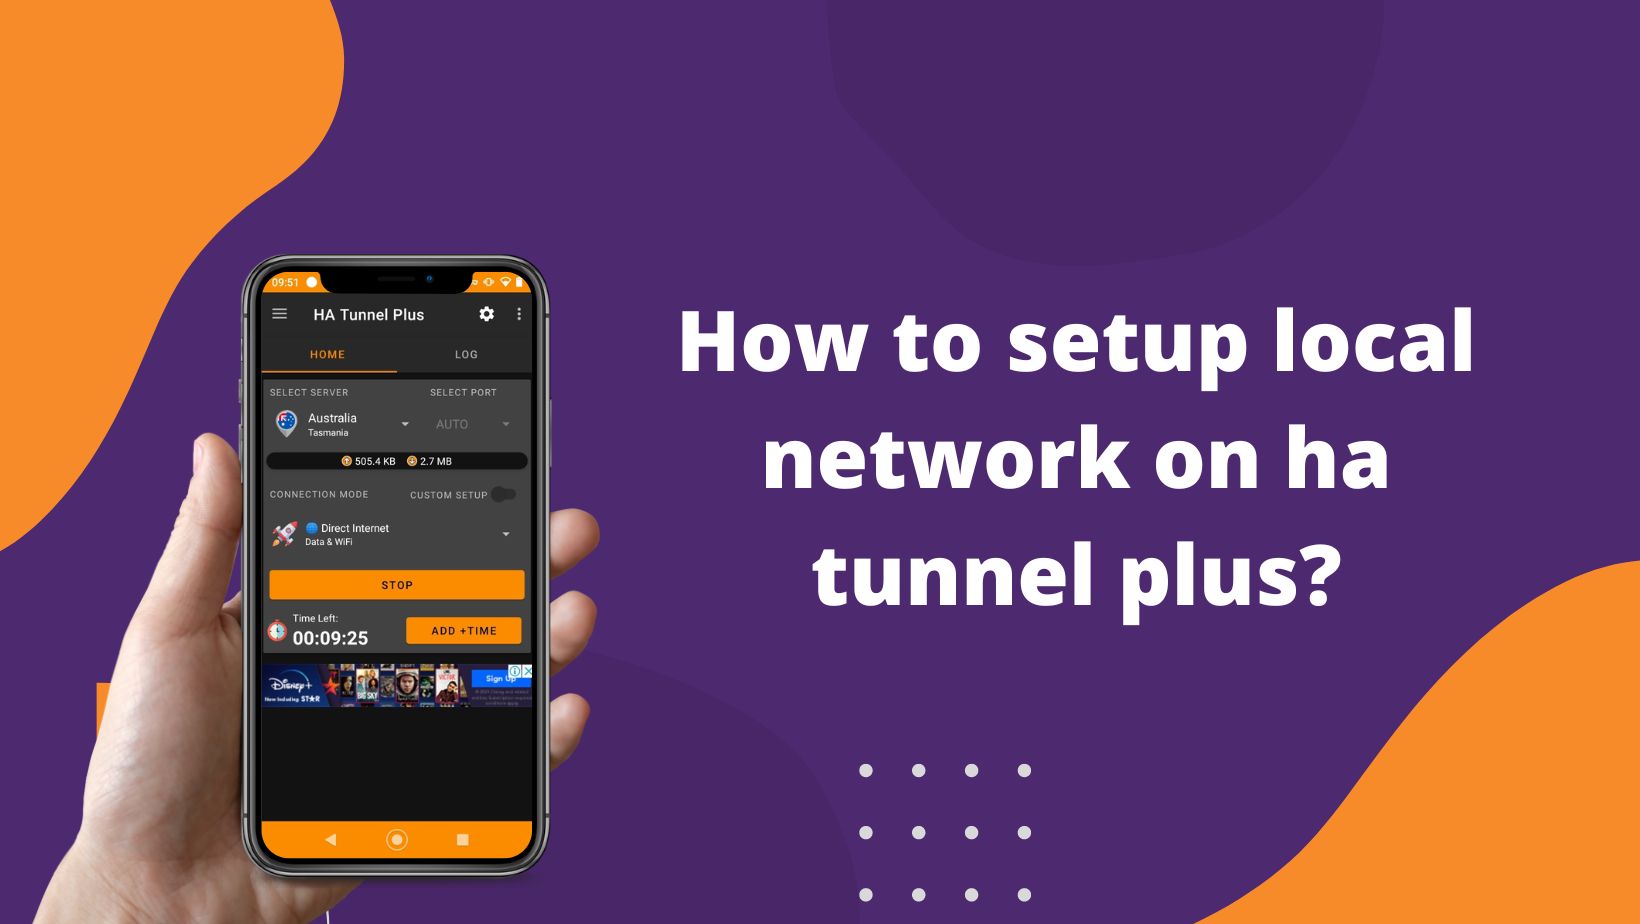 How To Setup Local Network On Ha Tunnel Plus